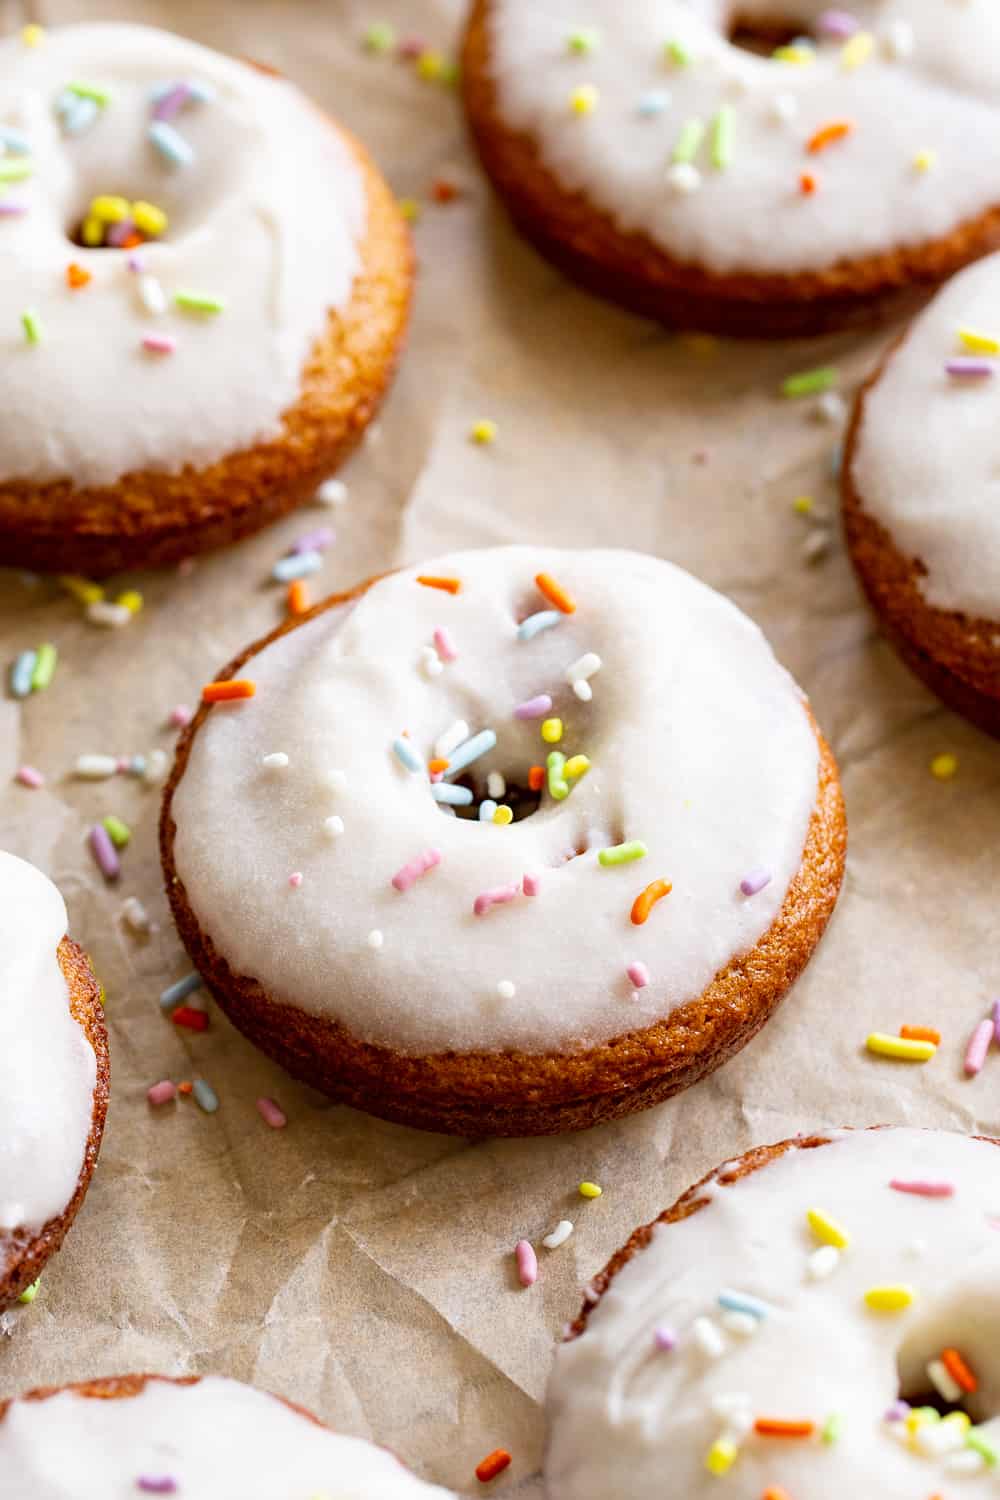 These paleo vanilla frosted donuts are a huge treat and easy to make, too! Healthy gluten free and dairy free baked donuts are dipped in a creamy vanilla frosting for a fun treat everyone will love. If you don't have a donut pan, make them into cupcakes! #paleo #cleaneating #glutenfree